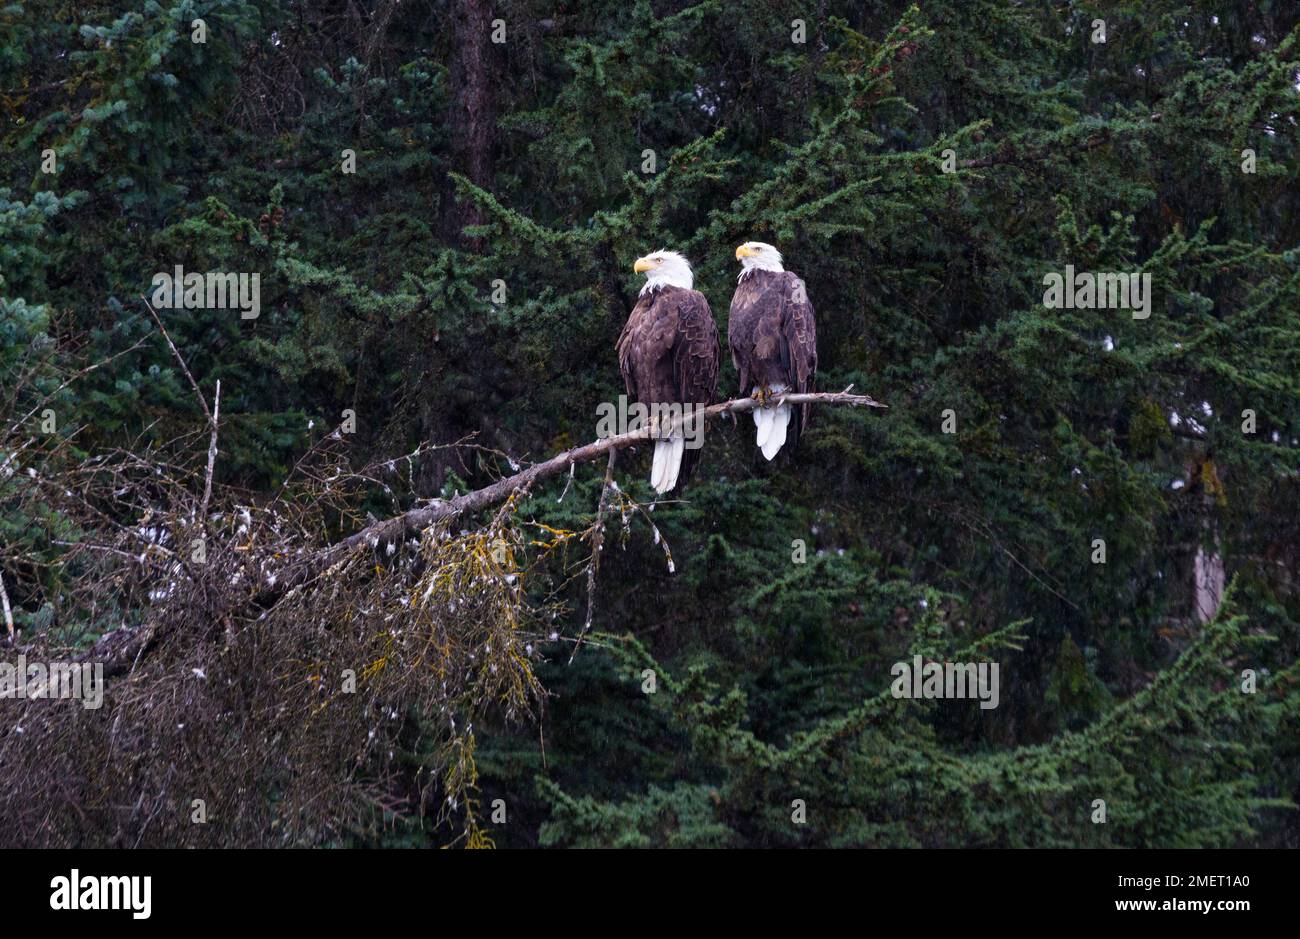 Adult Bald Eagle pair perched on branch against evergreen background touched with snow in Valdez, Alaska, United States Stock Photo